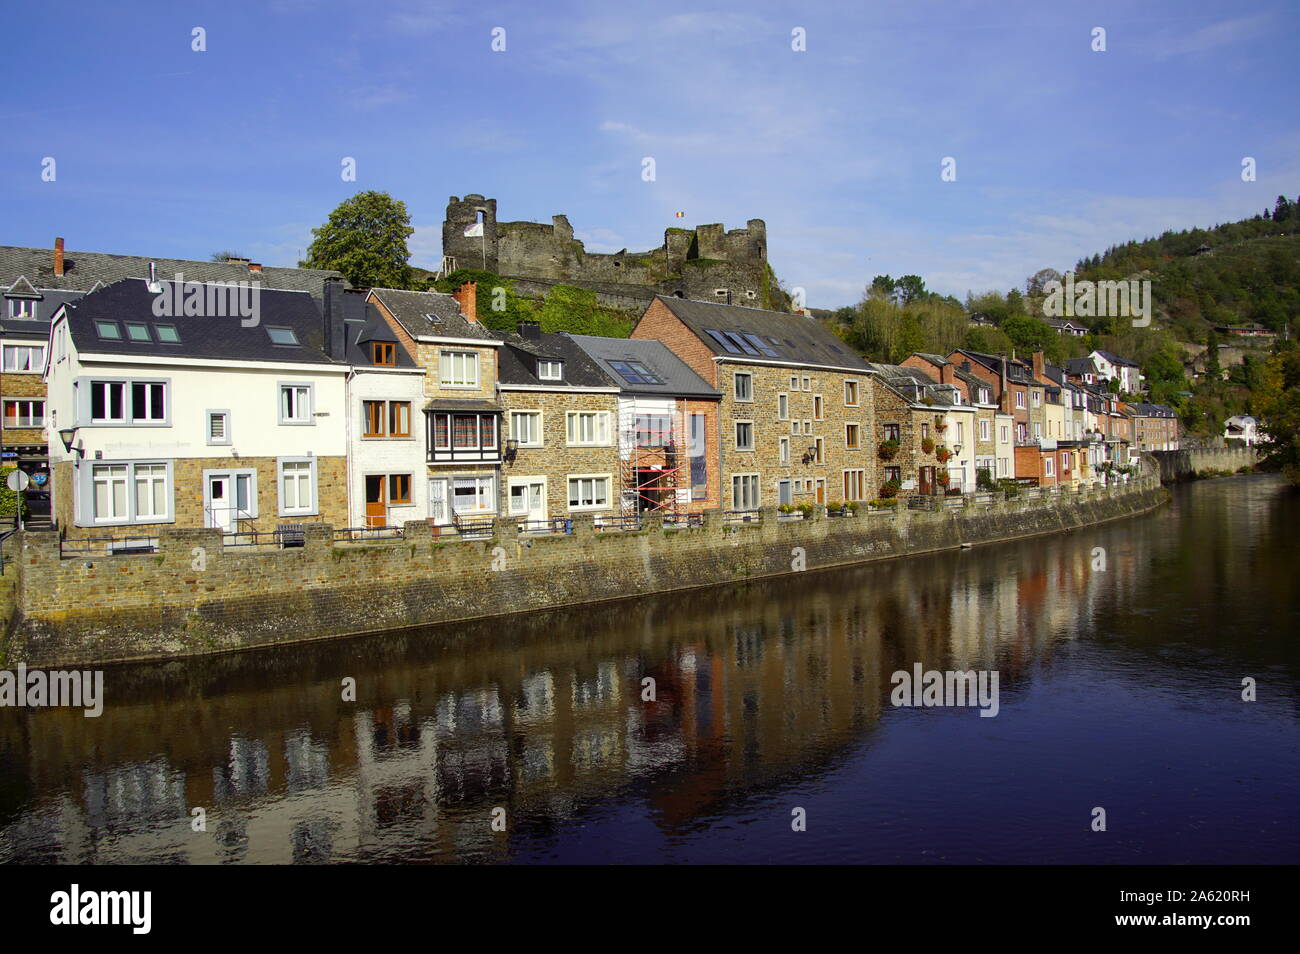 Embankment of the River Ourthe in the town of La Roche, Belgium. Stock Photo